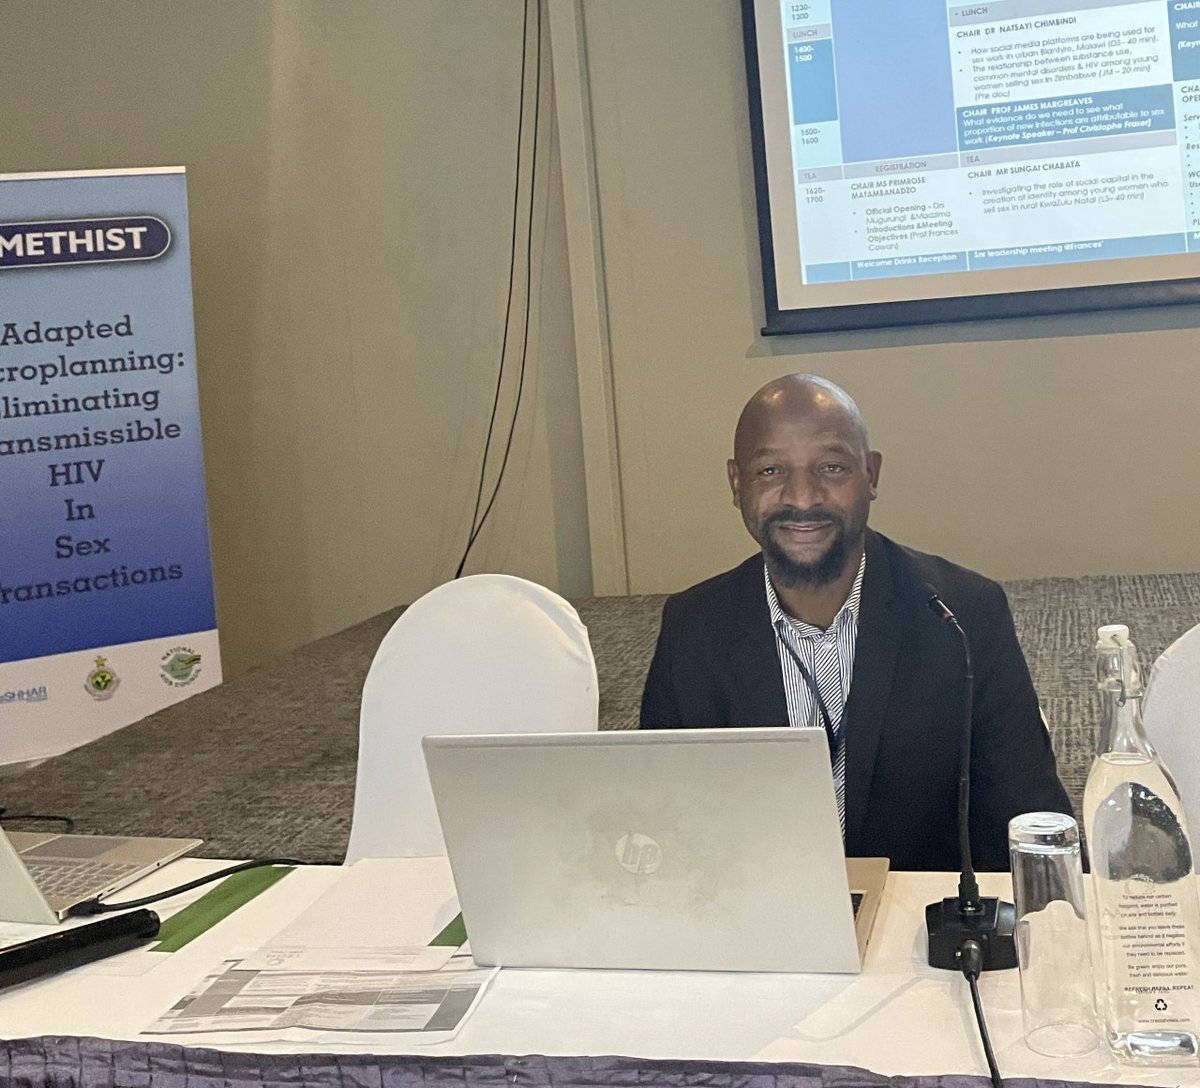 1/2 Great presentation by Galvin Maringwa on his Ph.D research on; “Characterizing male sexual partners & partnerships among female sex workers in Zimbabwe.” Male sexual partners of Female Sex Workers have rarely been specific targets for HIV/STDs interventions. #AMETHIST2023